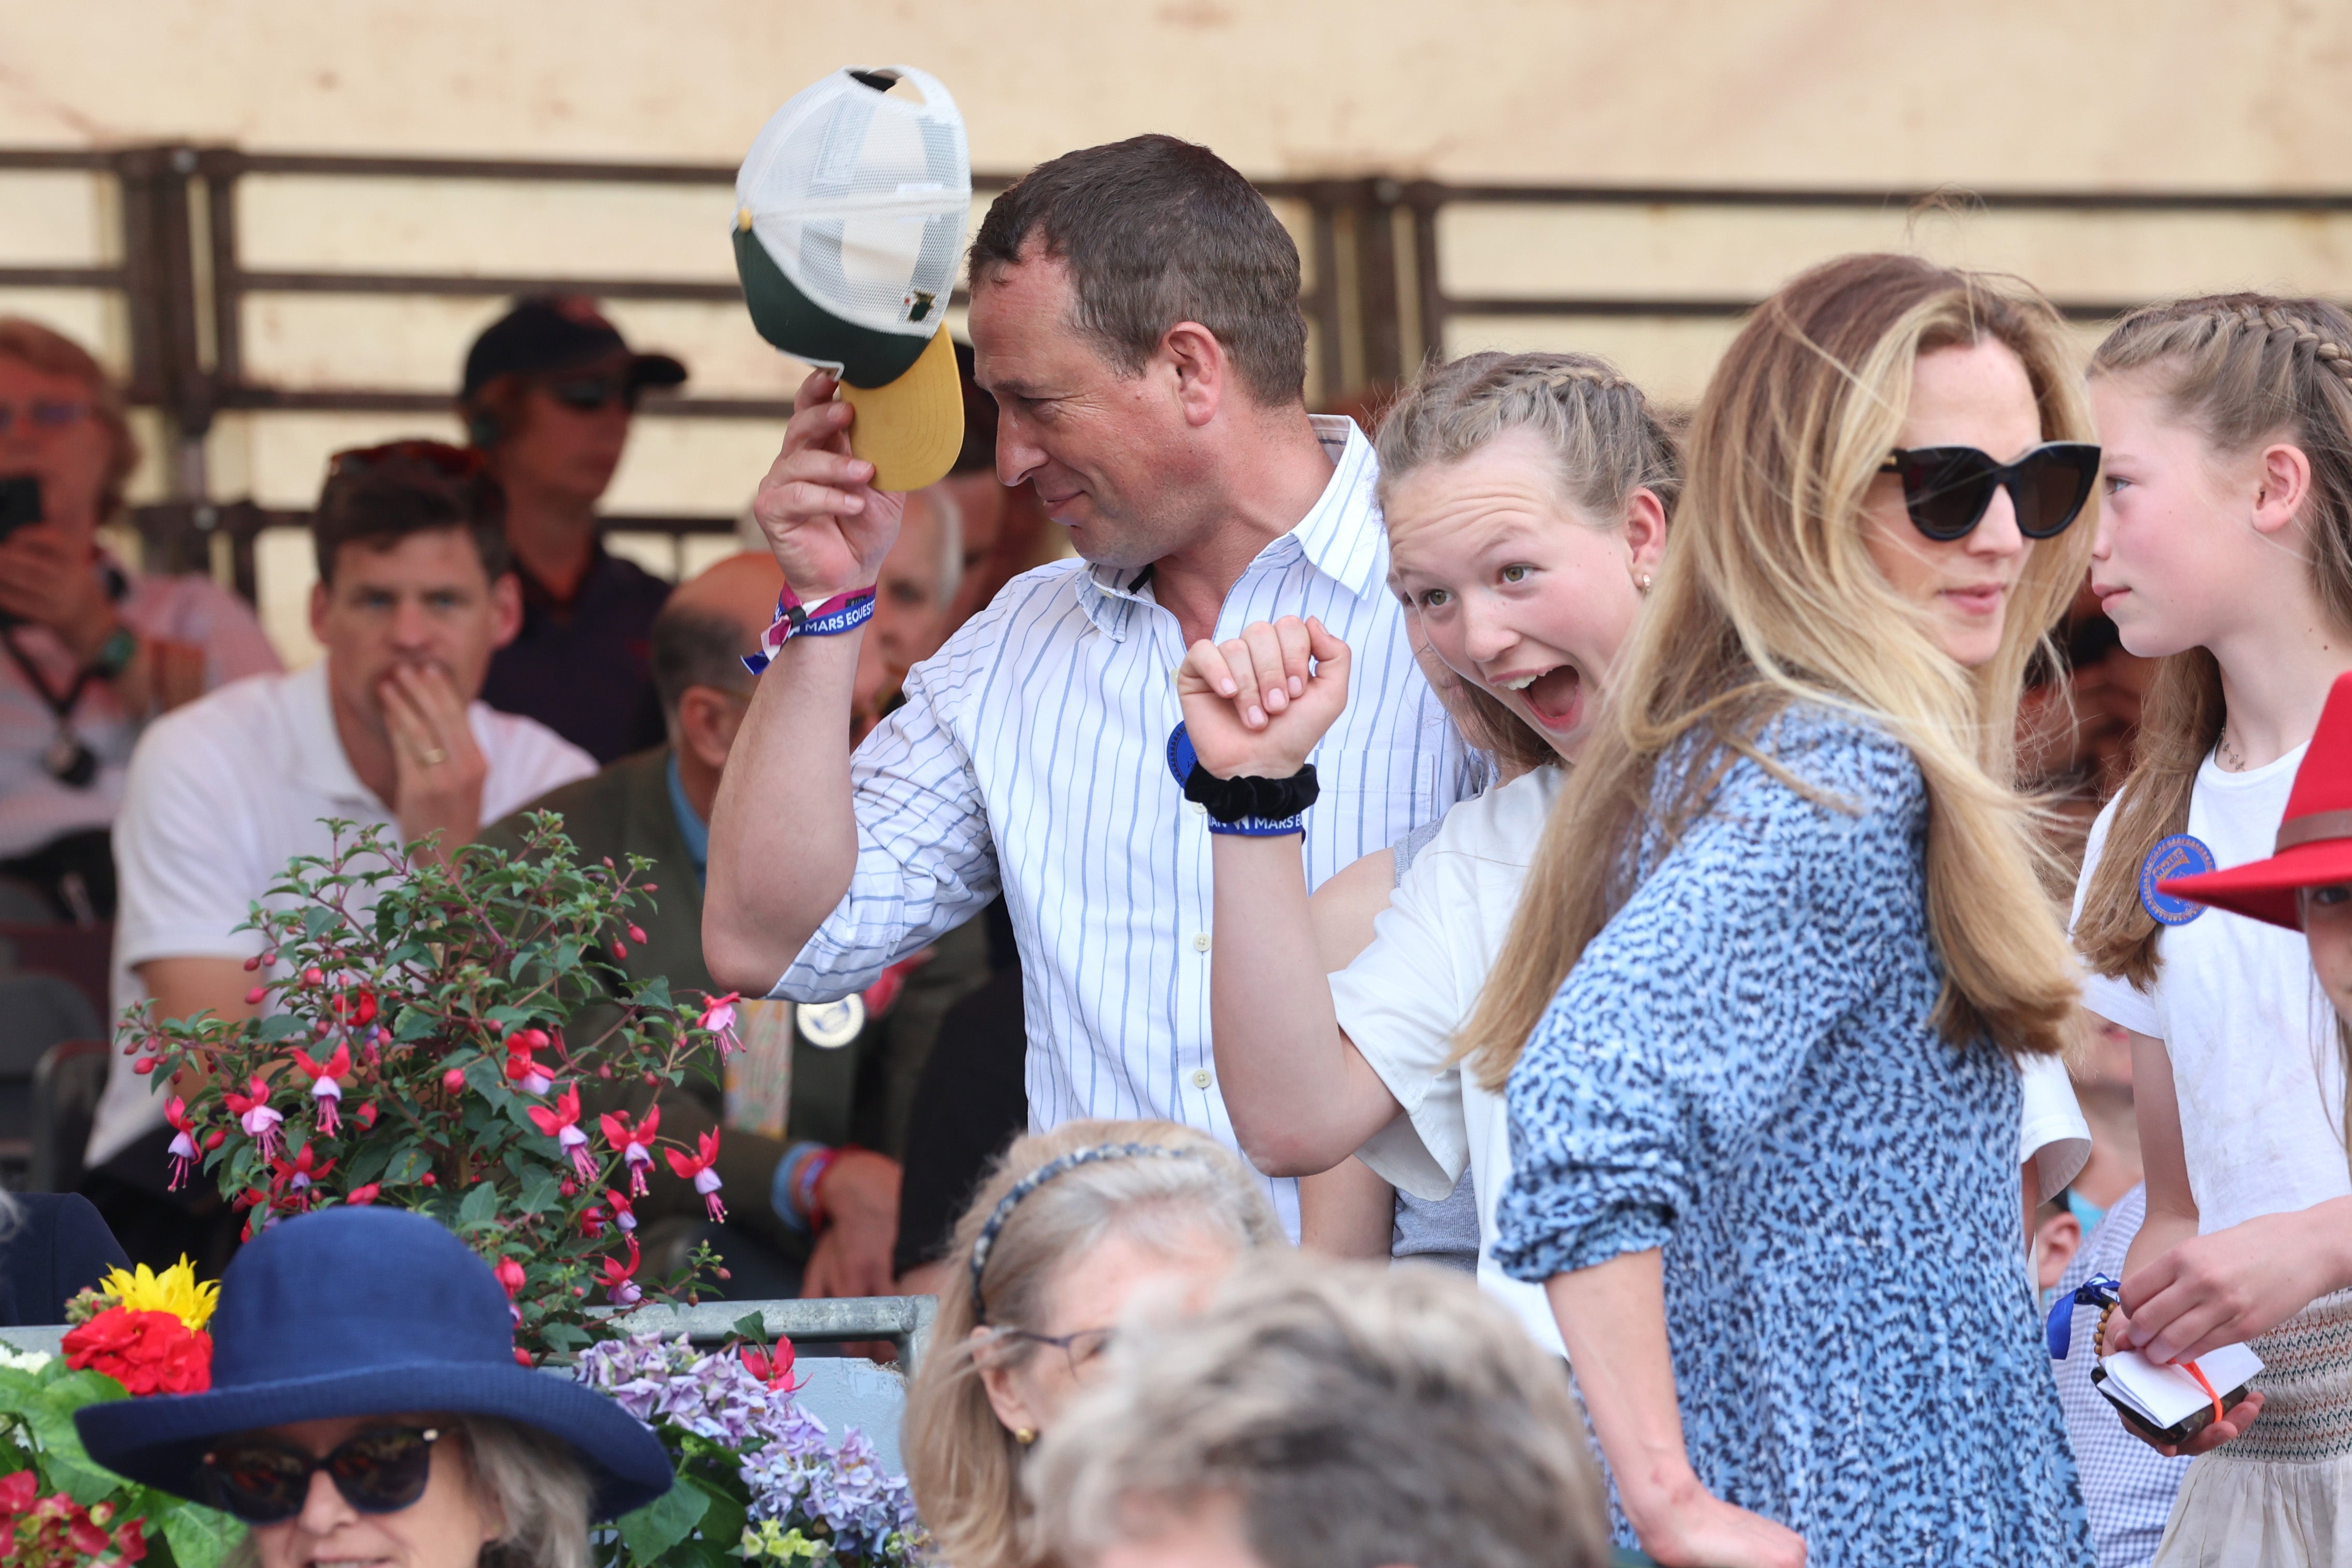 Peter Phillips brings date to cross-country horse riding event attended by the Queen